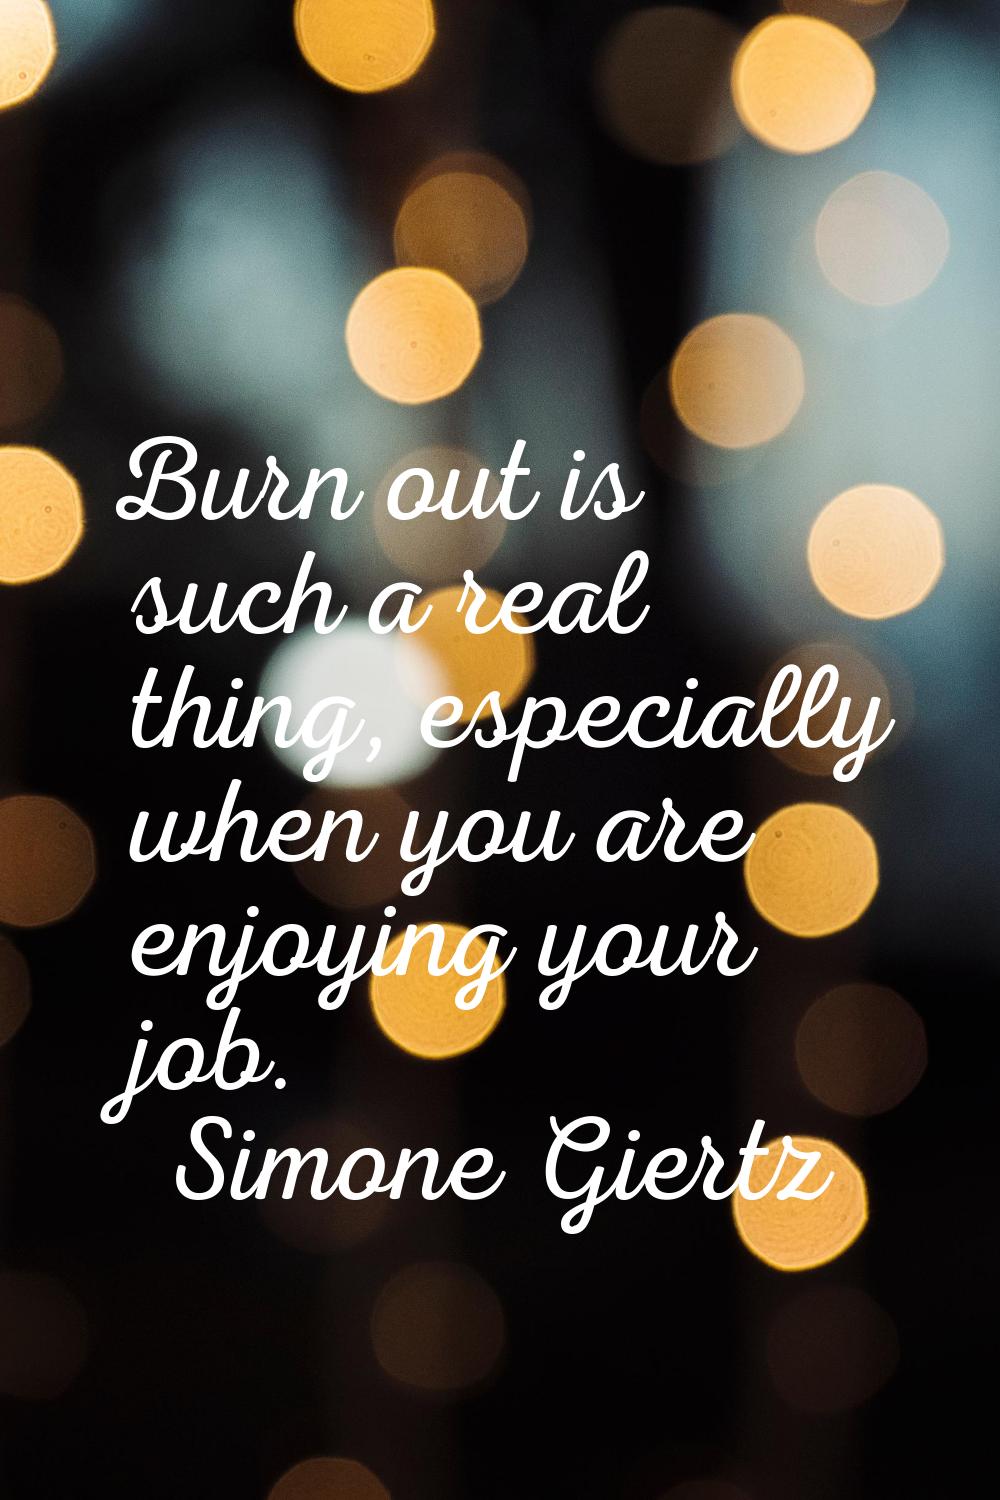 Burn out is such a real thing, especially when you are enjoying your job.